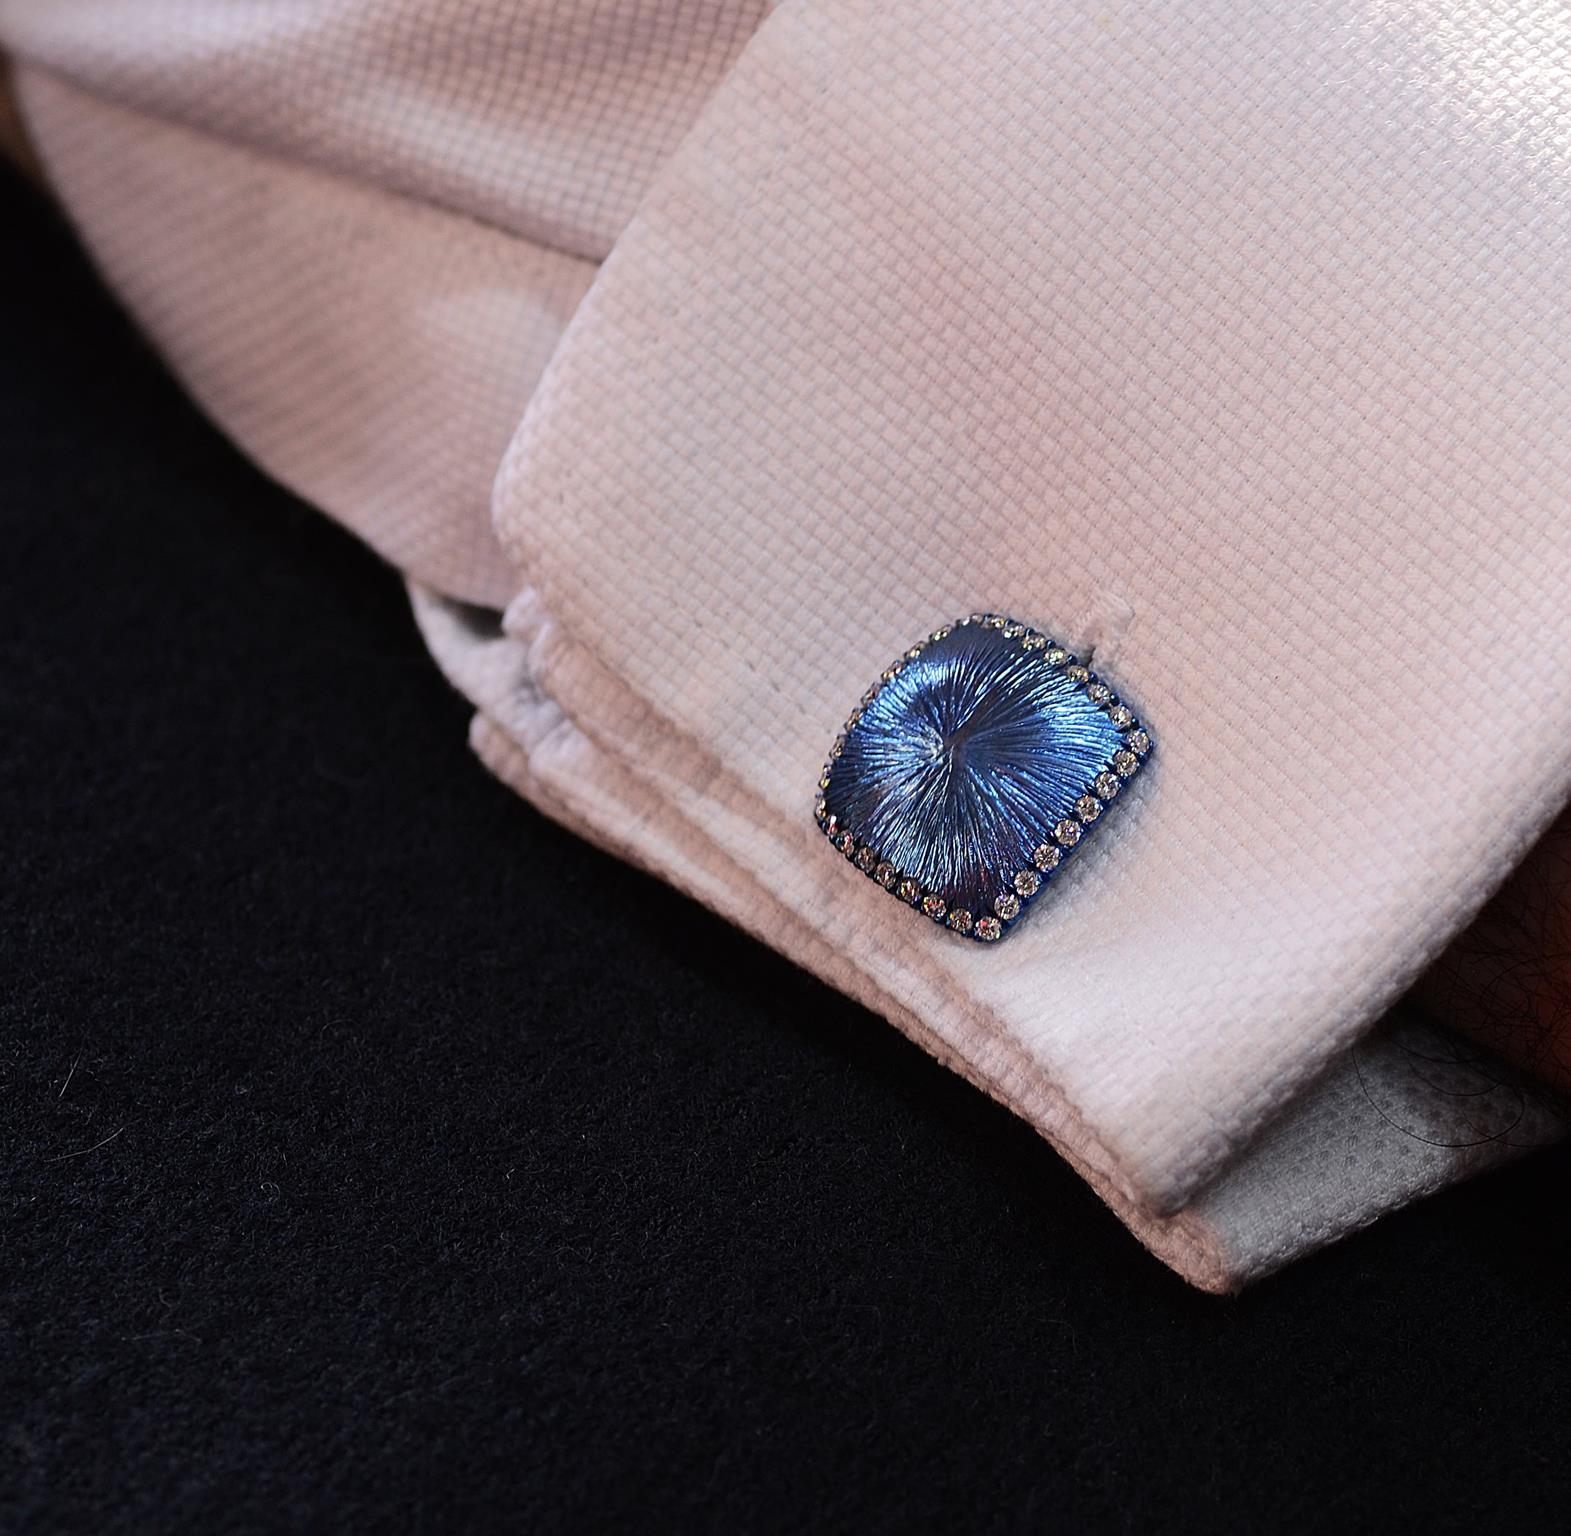 Handcrafted in Italy, the dress-set is made of  two cufflinks and 4 studs in blue titanium and white gold.
18K gold for  total grams 7.70
number 184 diamonds for total carat weight 2.24

The diamonds we use are natural diamonds and not synthetic.